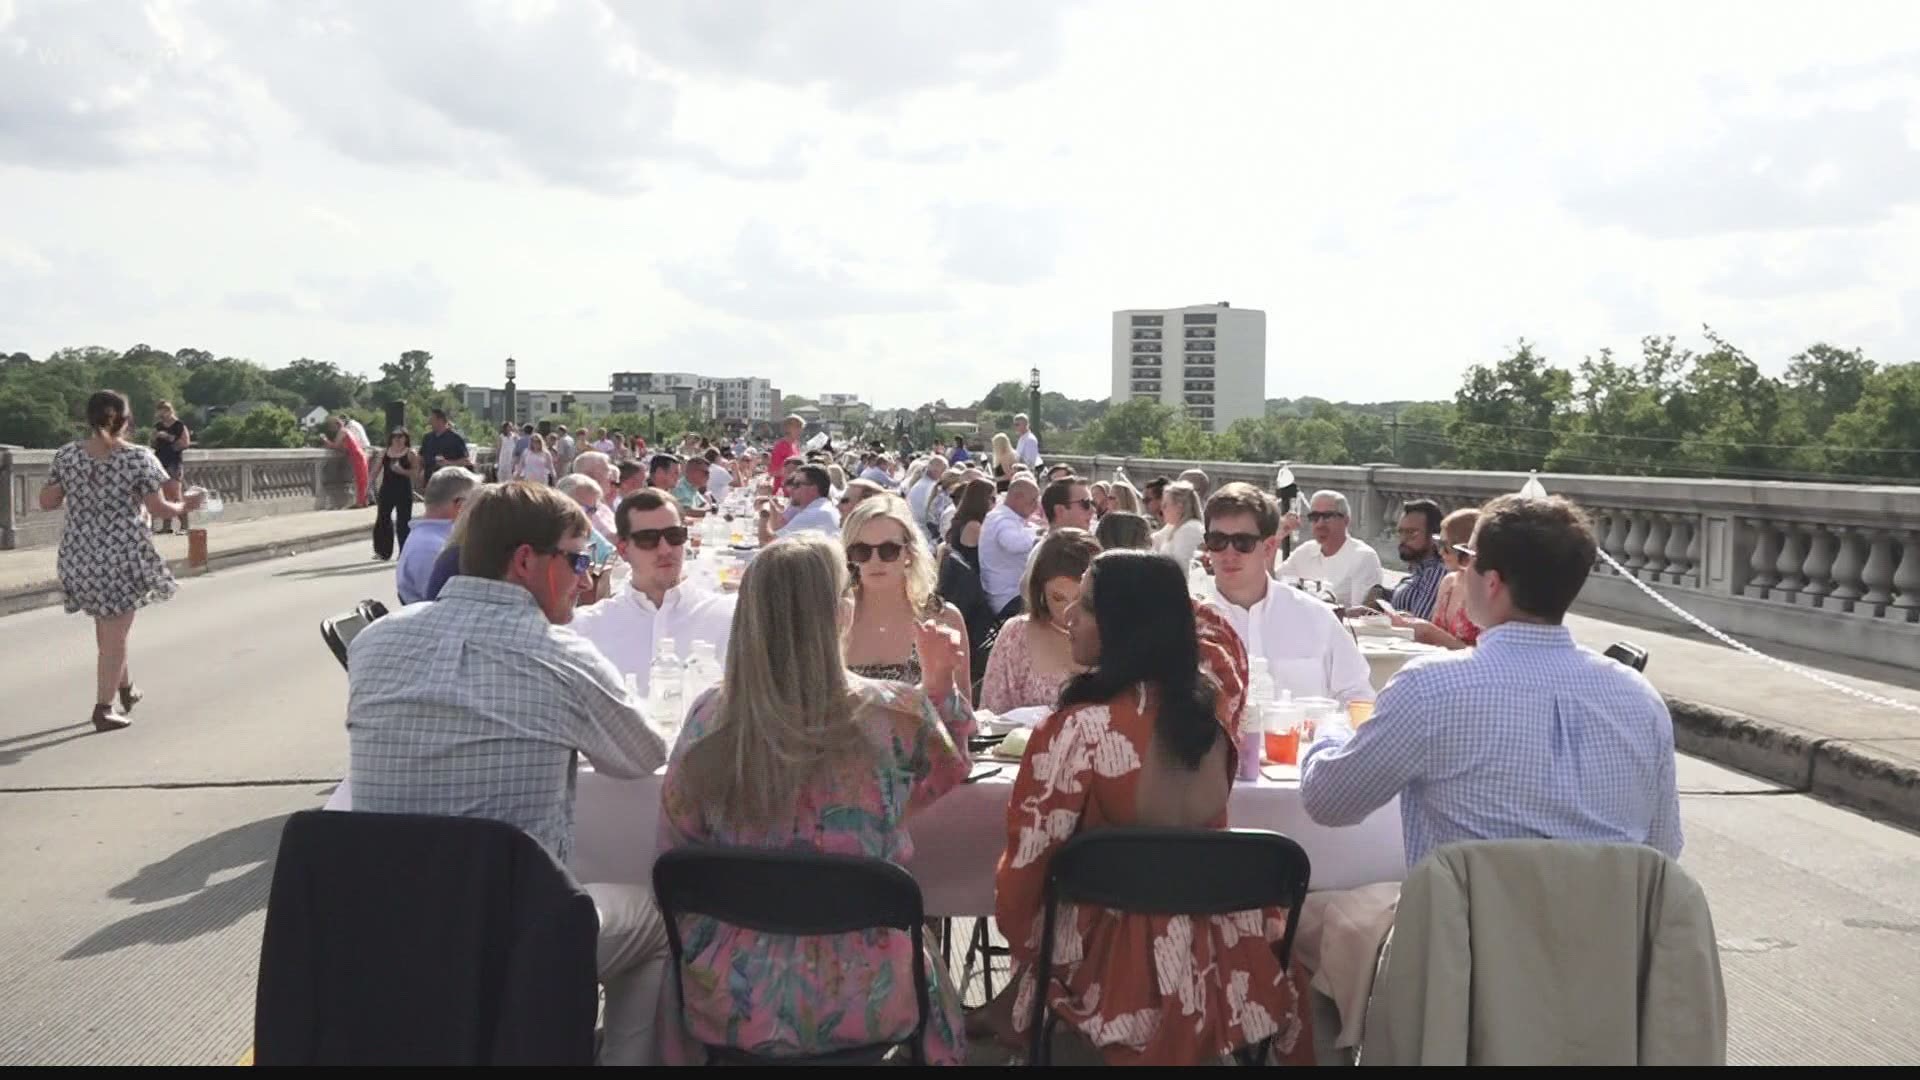 Annual event was sold out, about 1,000 diners gathered on iconic Midlands landmark